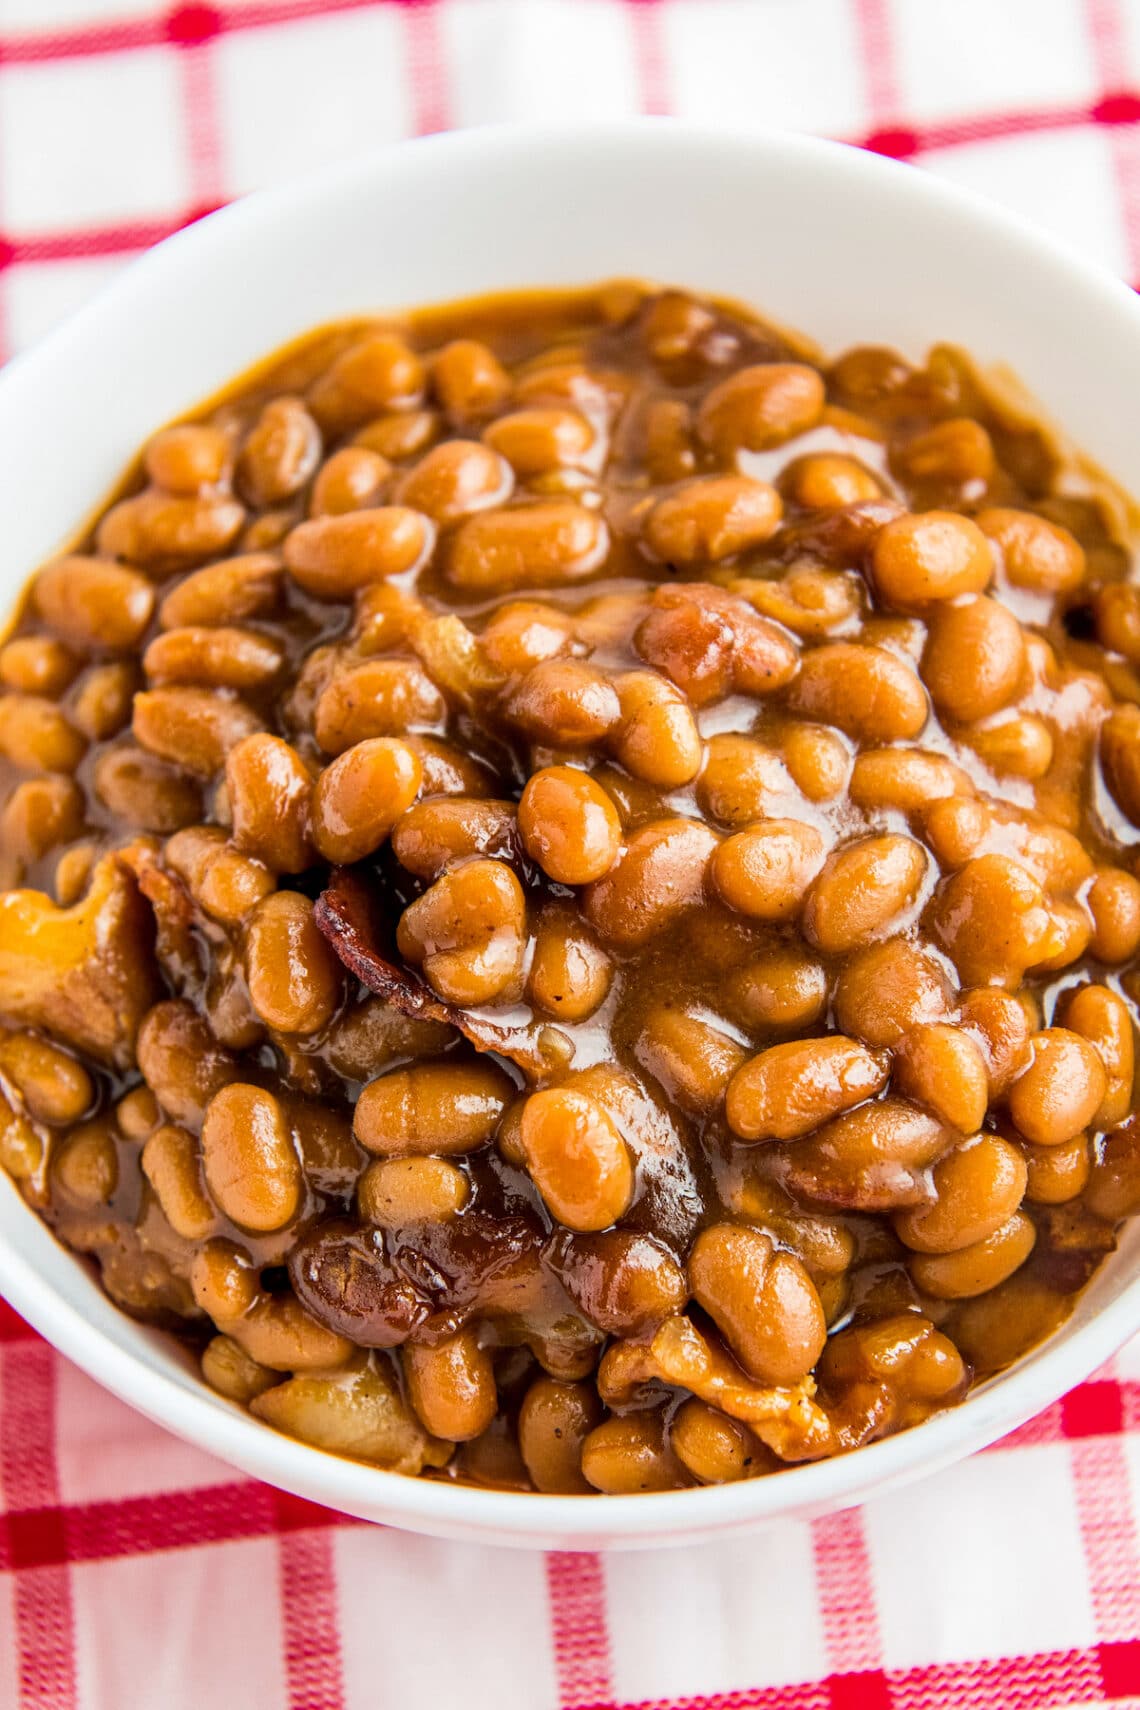 Baked beans in a white bowl on a picnic table.